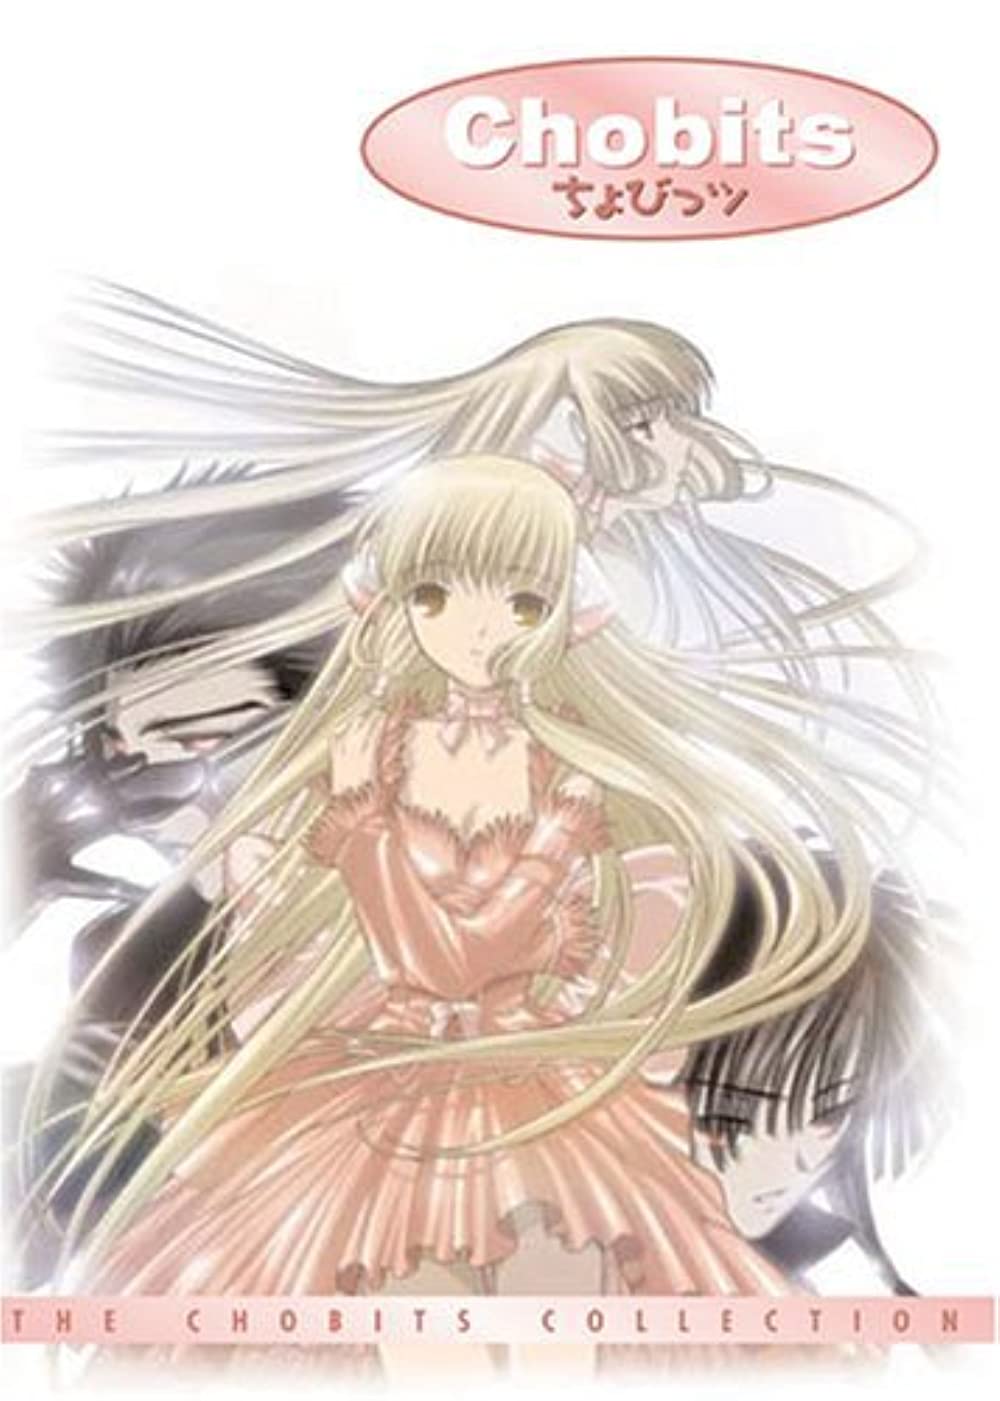 Chobits Manga Anime - Paint By Numbers - Painting By Numbers